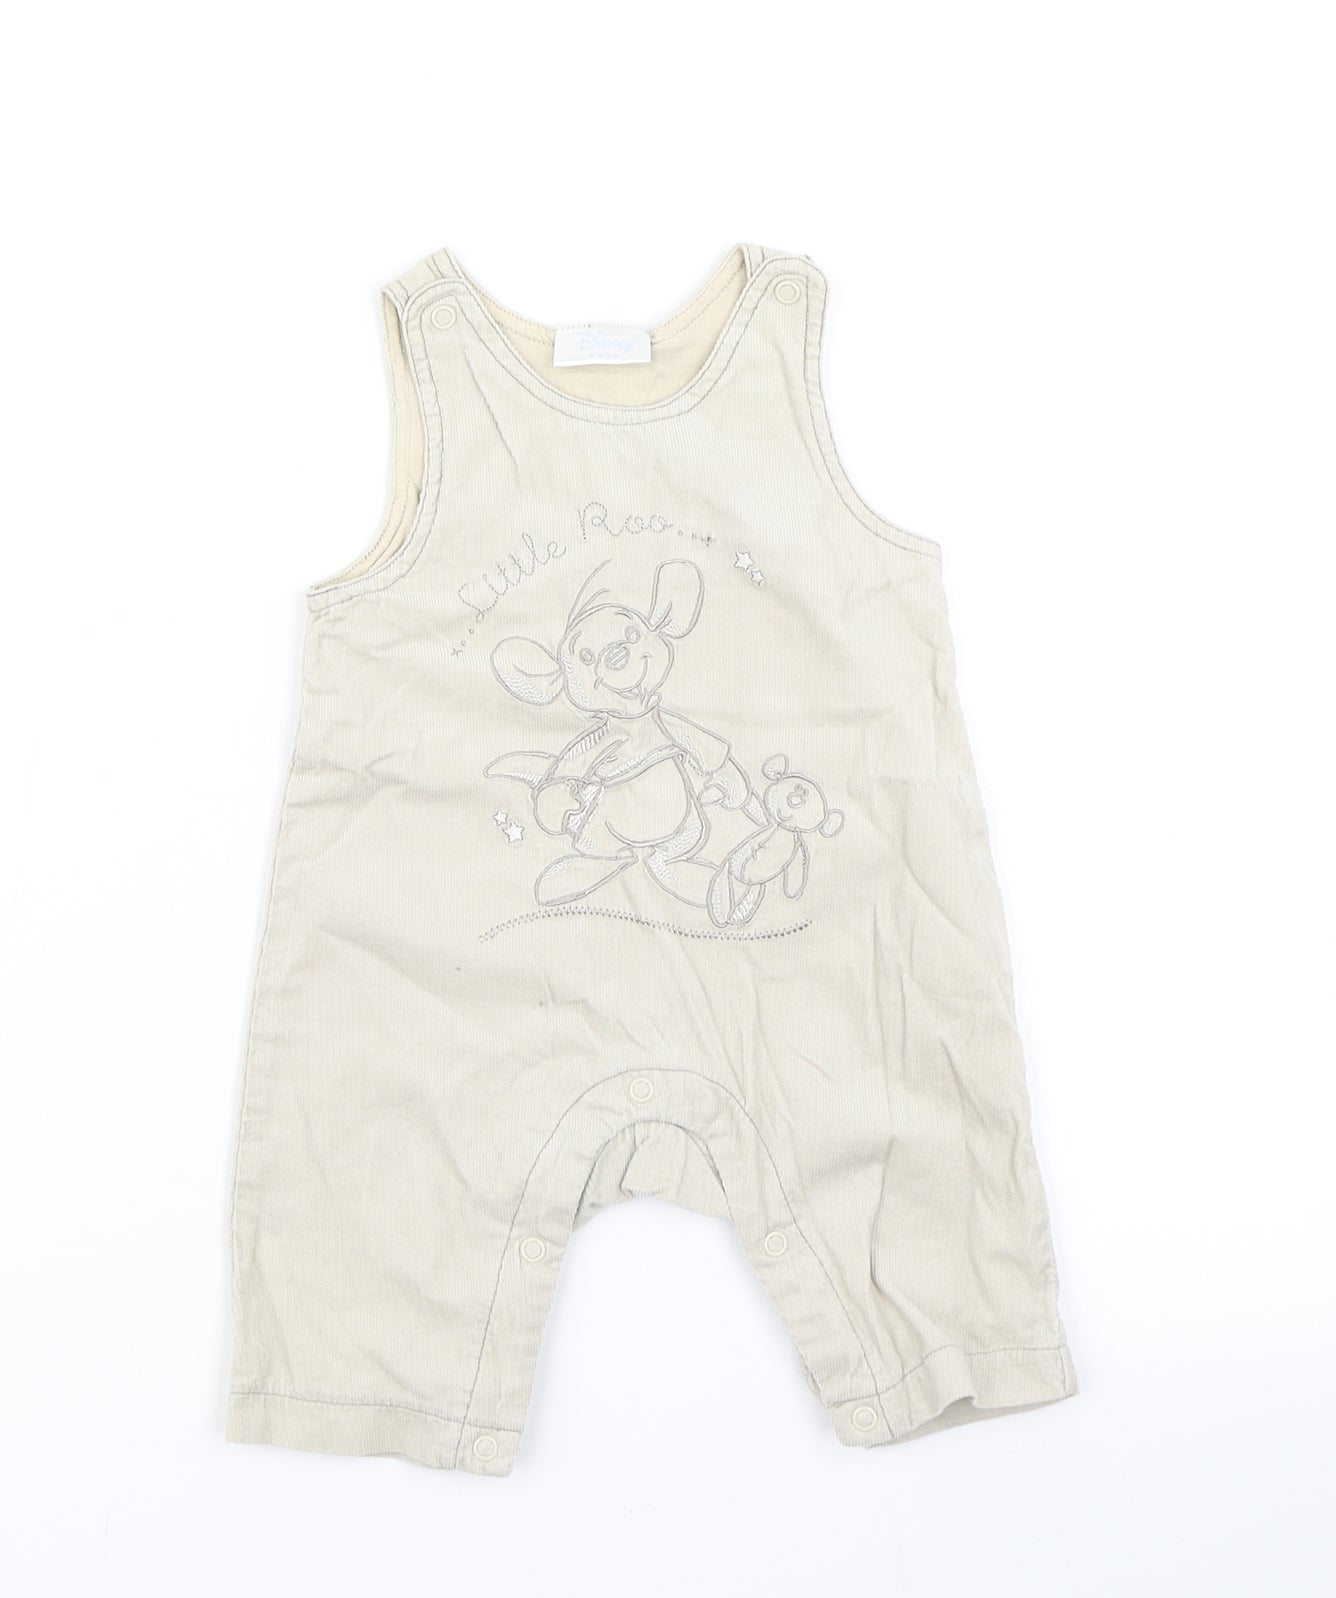 F&F Boys Brown  Corduroy Dungaree One-Piece Size 0-3 Months  - Disney Little Roo